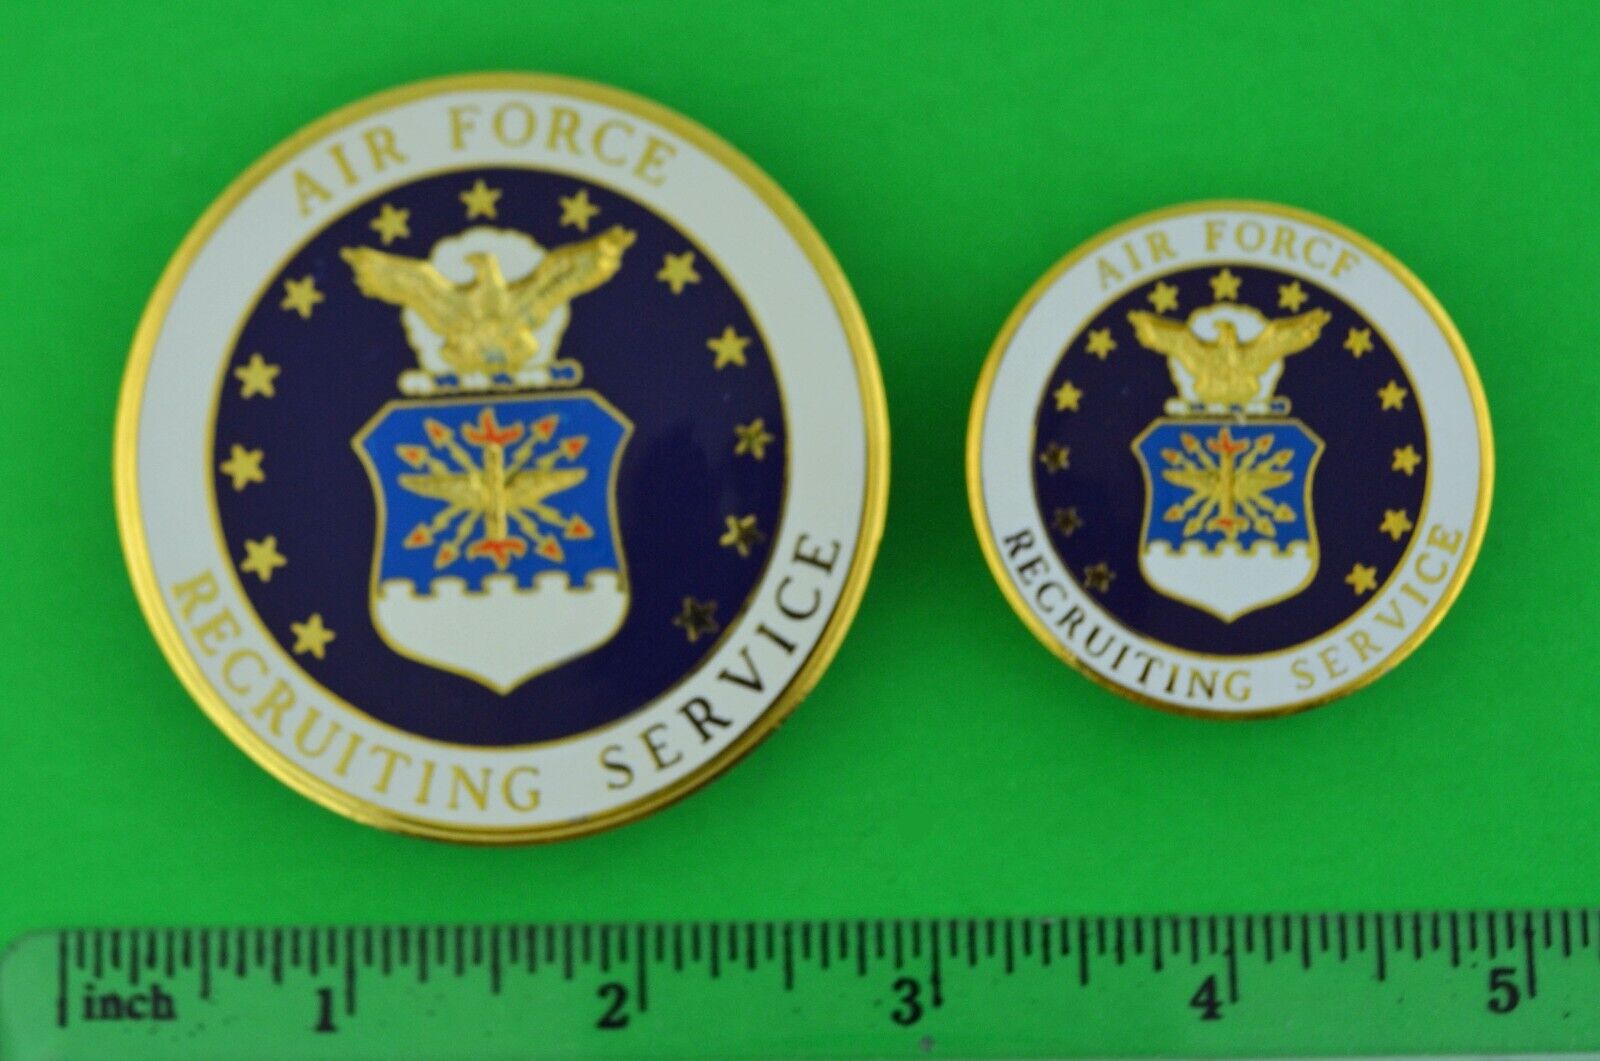 US Air Force Recruiting Service Badges - Pair full size and miniature size.